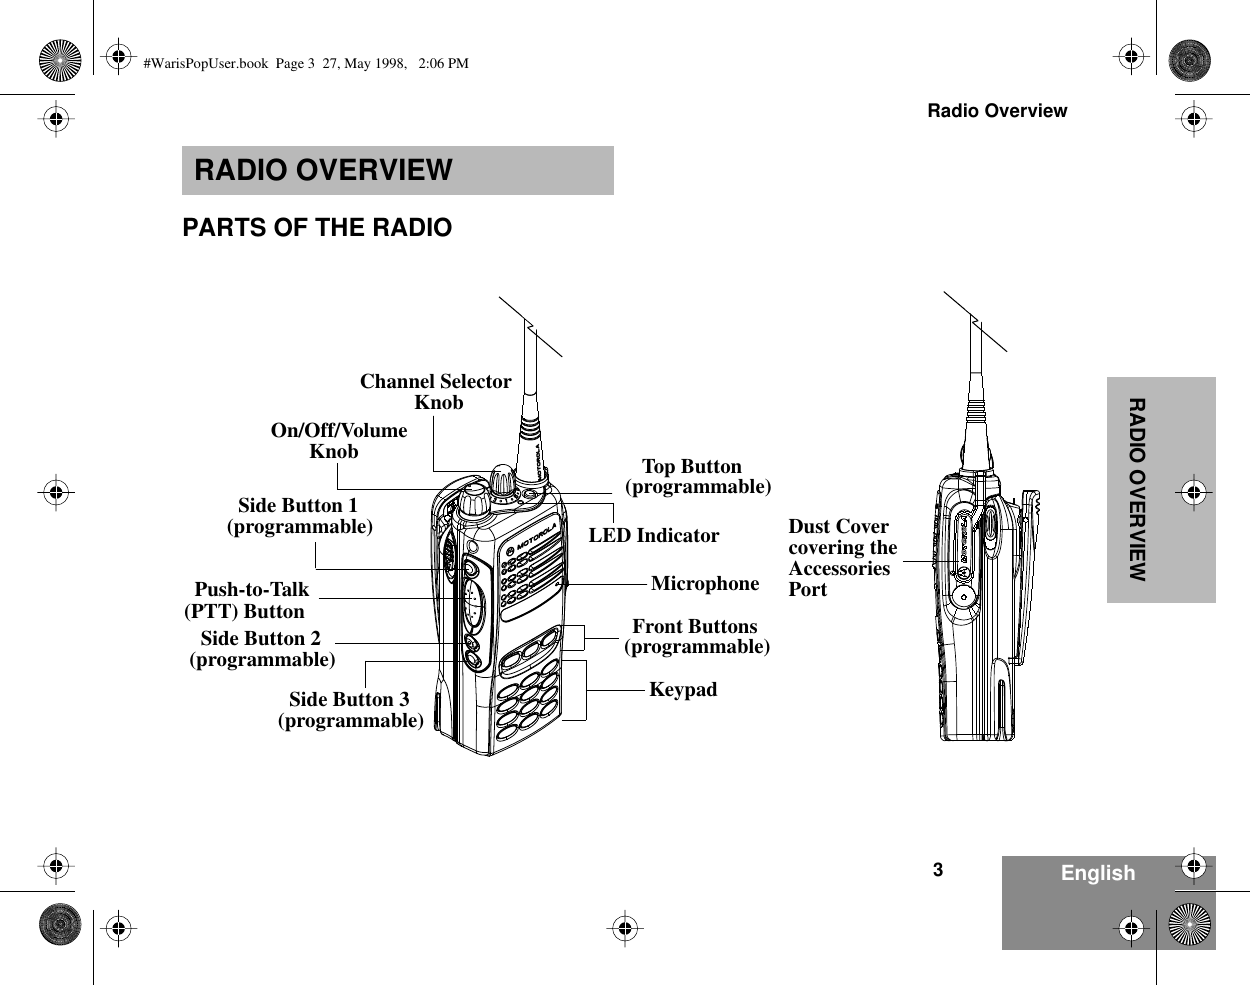  3Radio Overview EnglishRADIO OVERVIEW RADIO OVERVIEW PARTS OF THE RADIOOn/Off/VolumeKnobChannel SelectorKnobMicrophoneKeypad(programmable)(programmable)Top Button(programmable)Side Button 1Push-to-Talk(PTT) Button Front ButtonsLED Indicator(programmable)Side Button 2(programmable)Side Button 3Dust Covercovering theAccessoriesPort #WarisPopUser.book  Page 3  27, May 1998,   2:06 PM